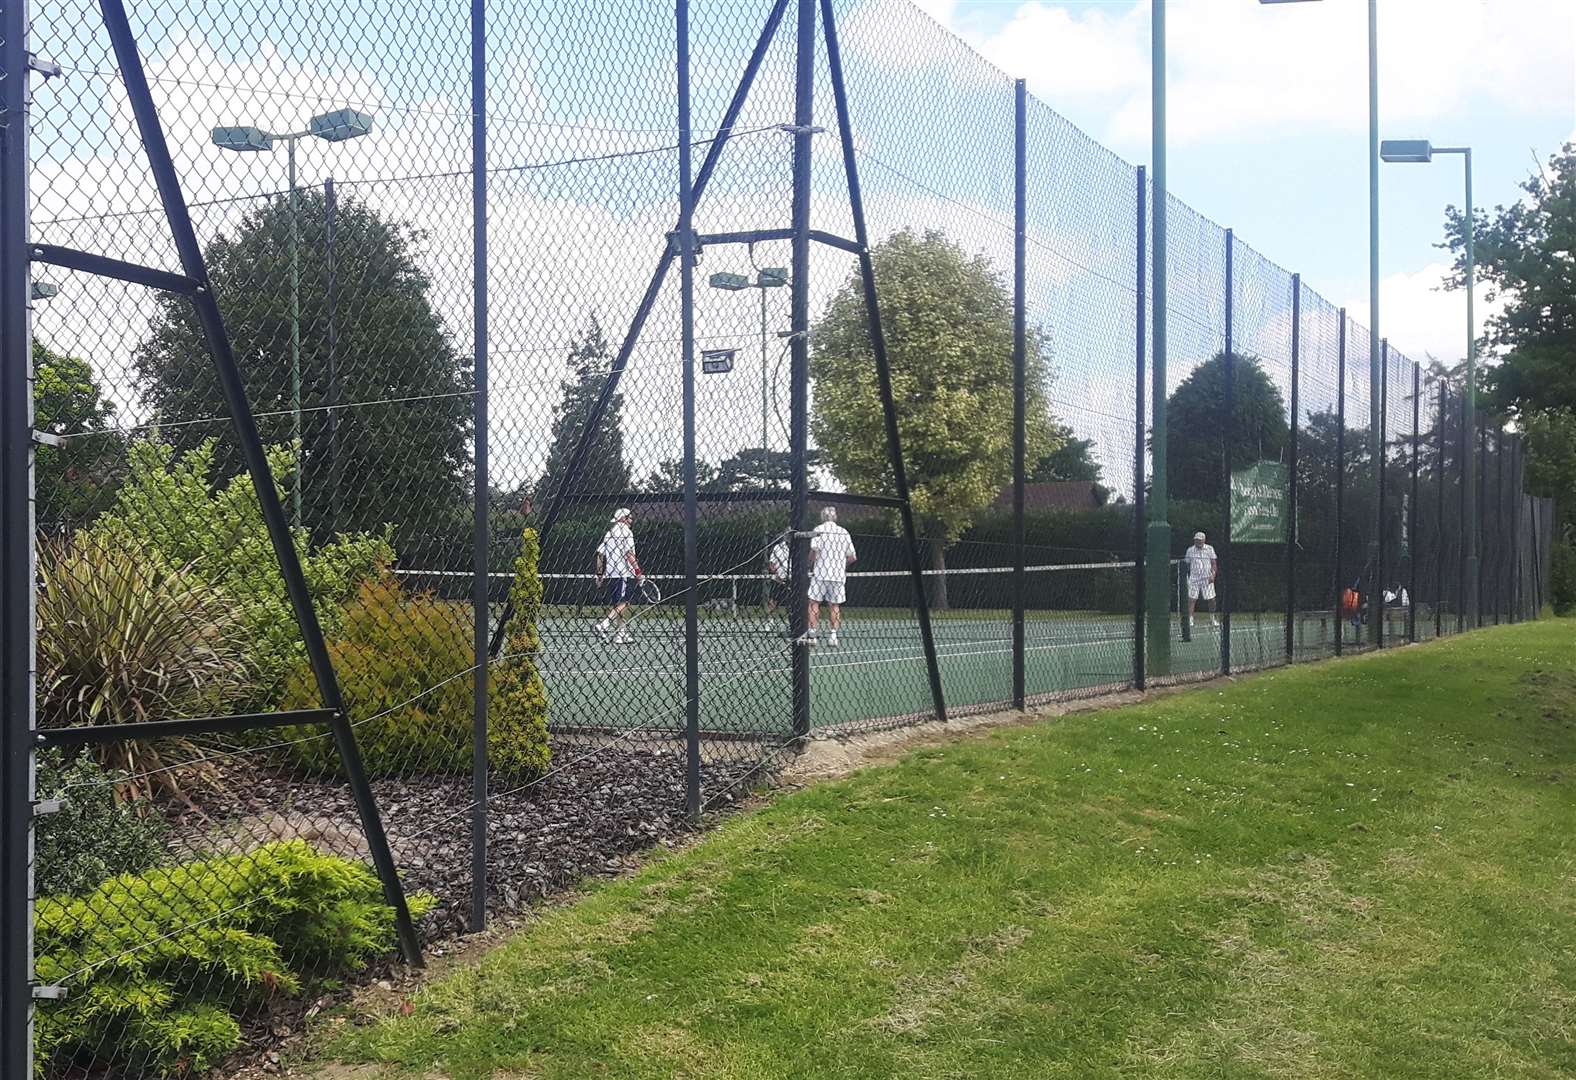 The tennis club hopes to expand to offer extra courts